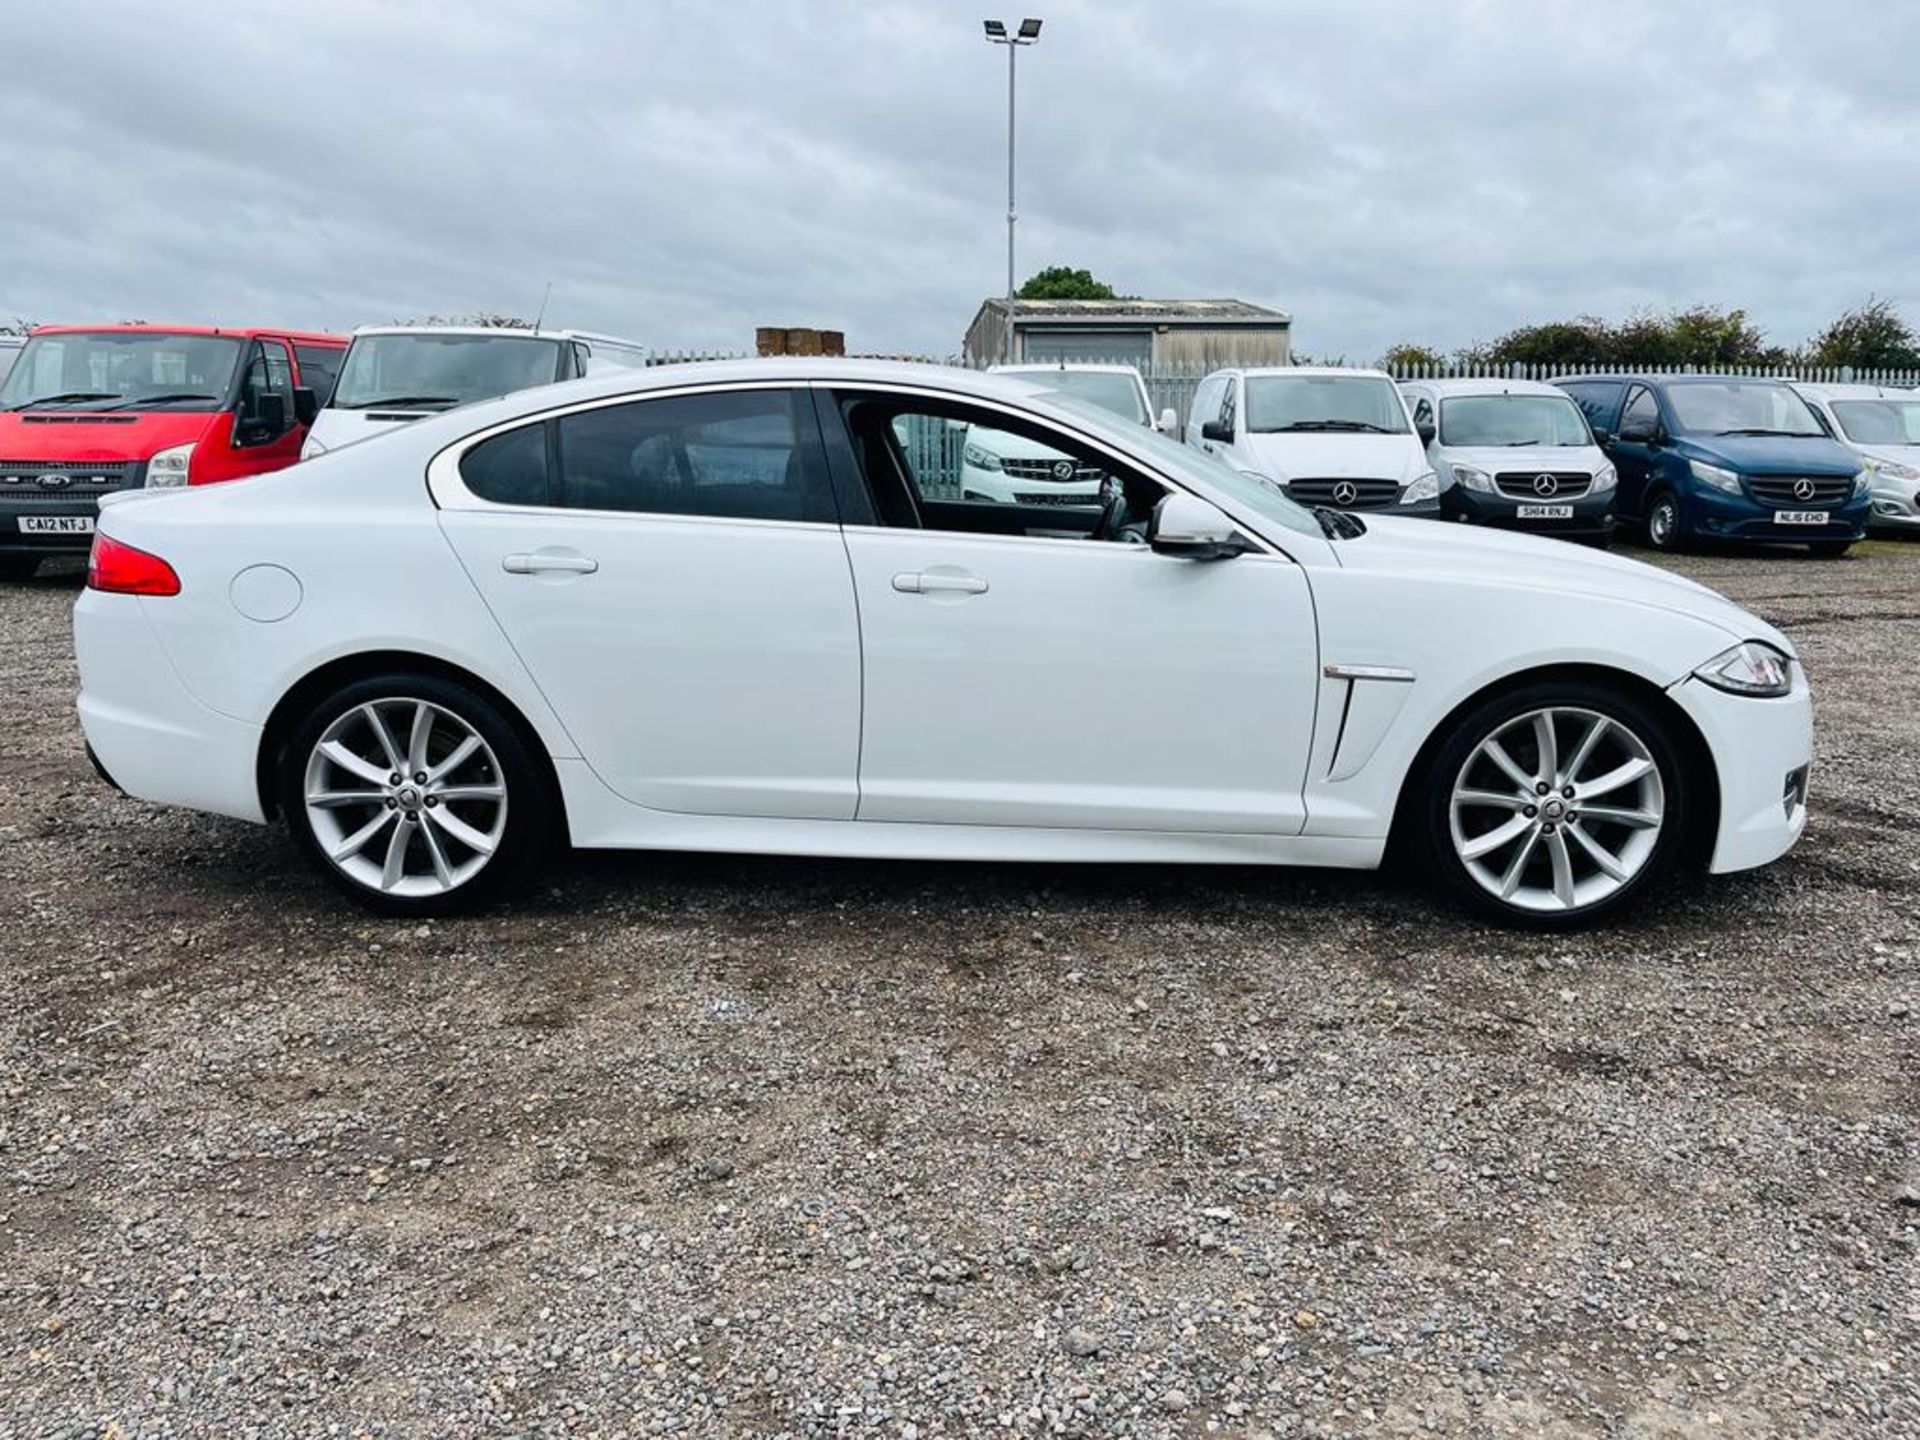 ** ON SALE ** Jaguar XF Sport D 200 2.2 2013 "63 Reg" - Air Conditioning - Touch Screen System - Image 10 of 30